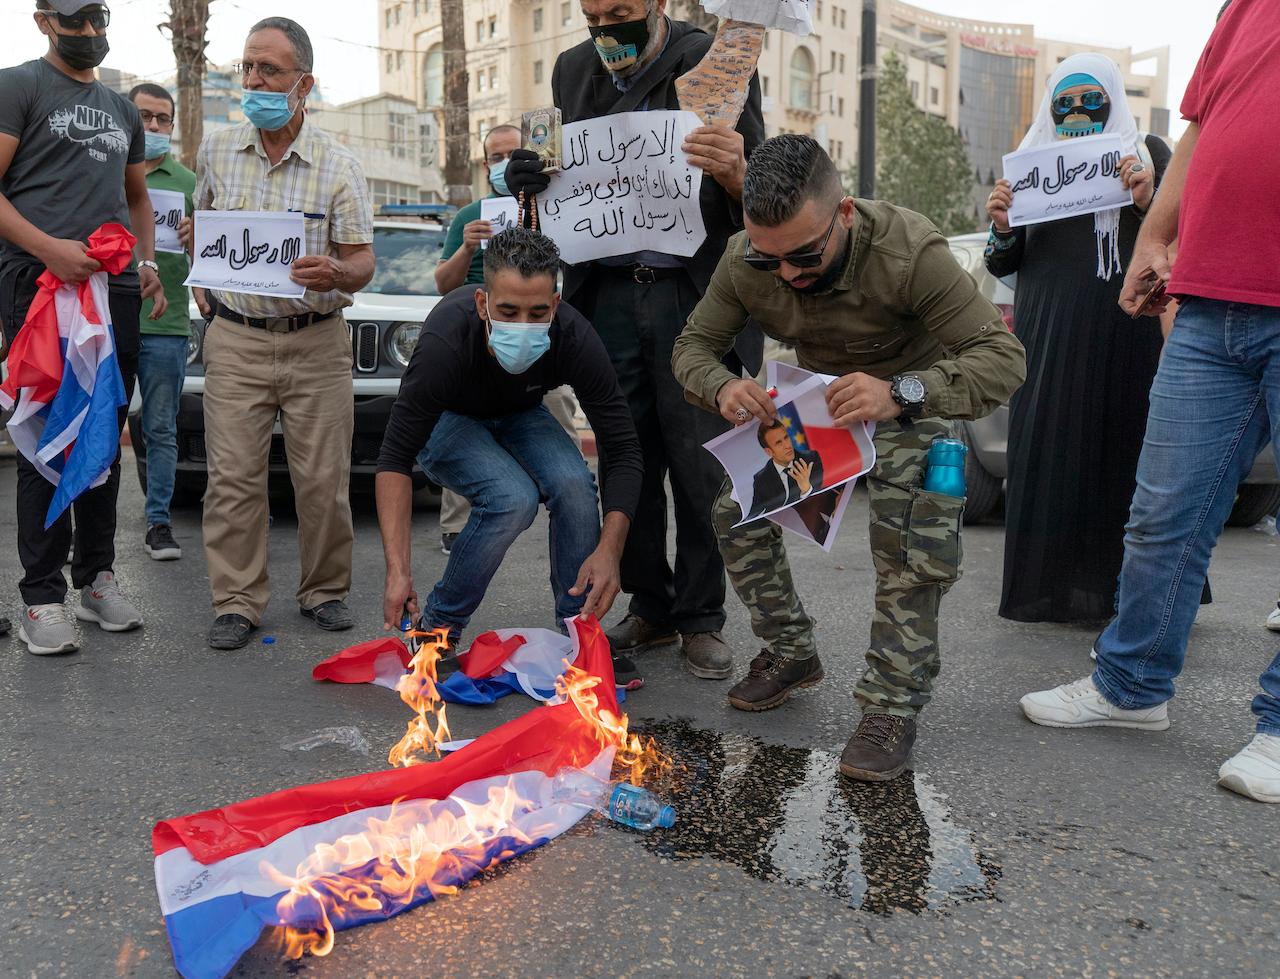 Palestinian protesters burn representations of French flags and pictures of French President Emmanuel Macron during a protest in the West Bank city of Ramallah on Oct 27. Photo: AP